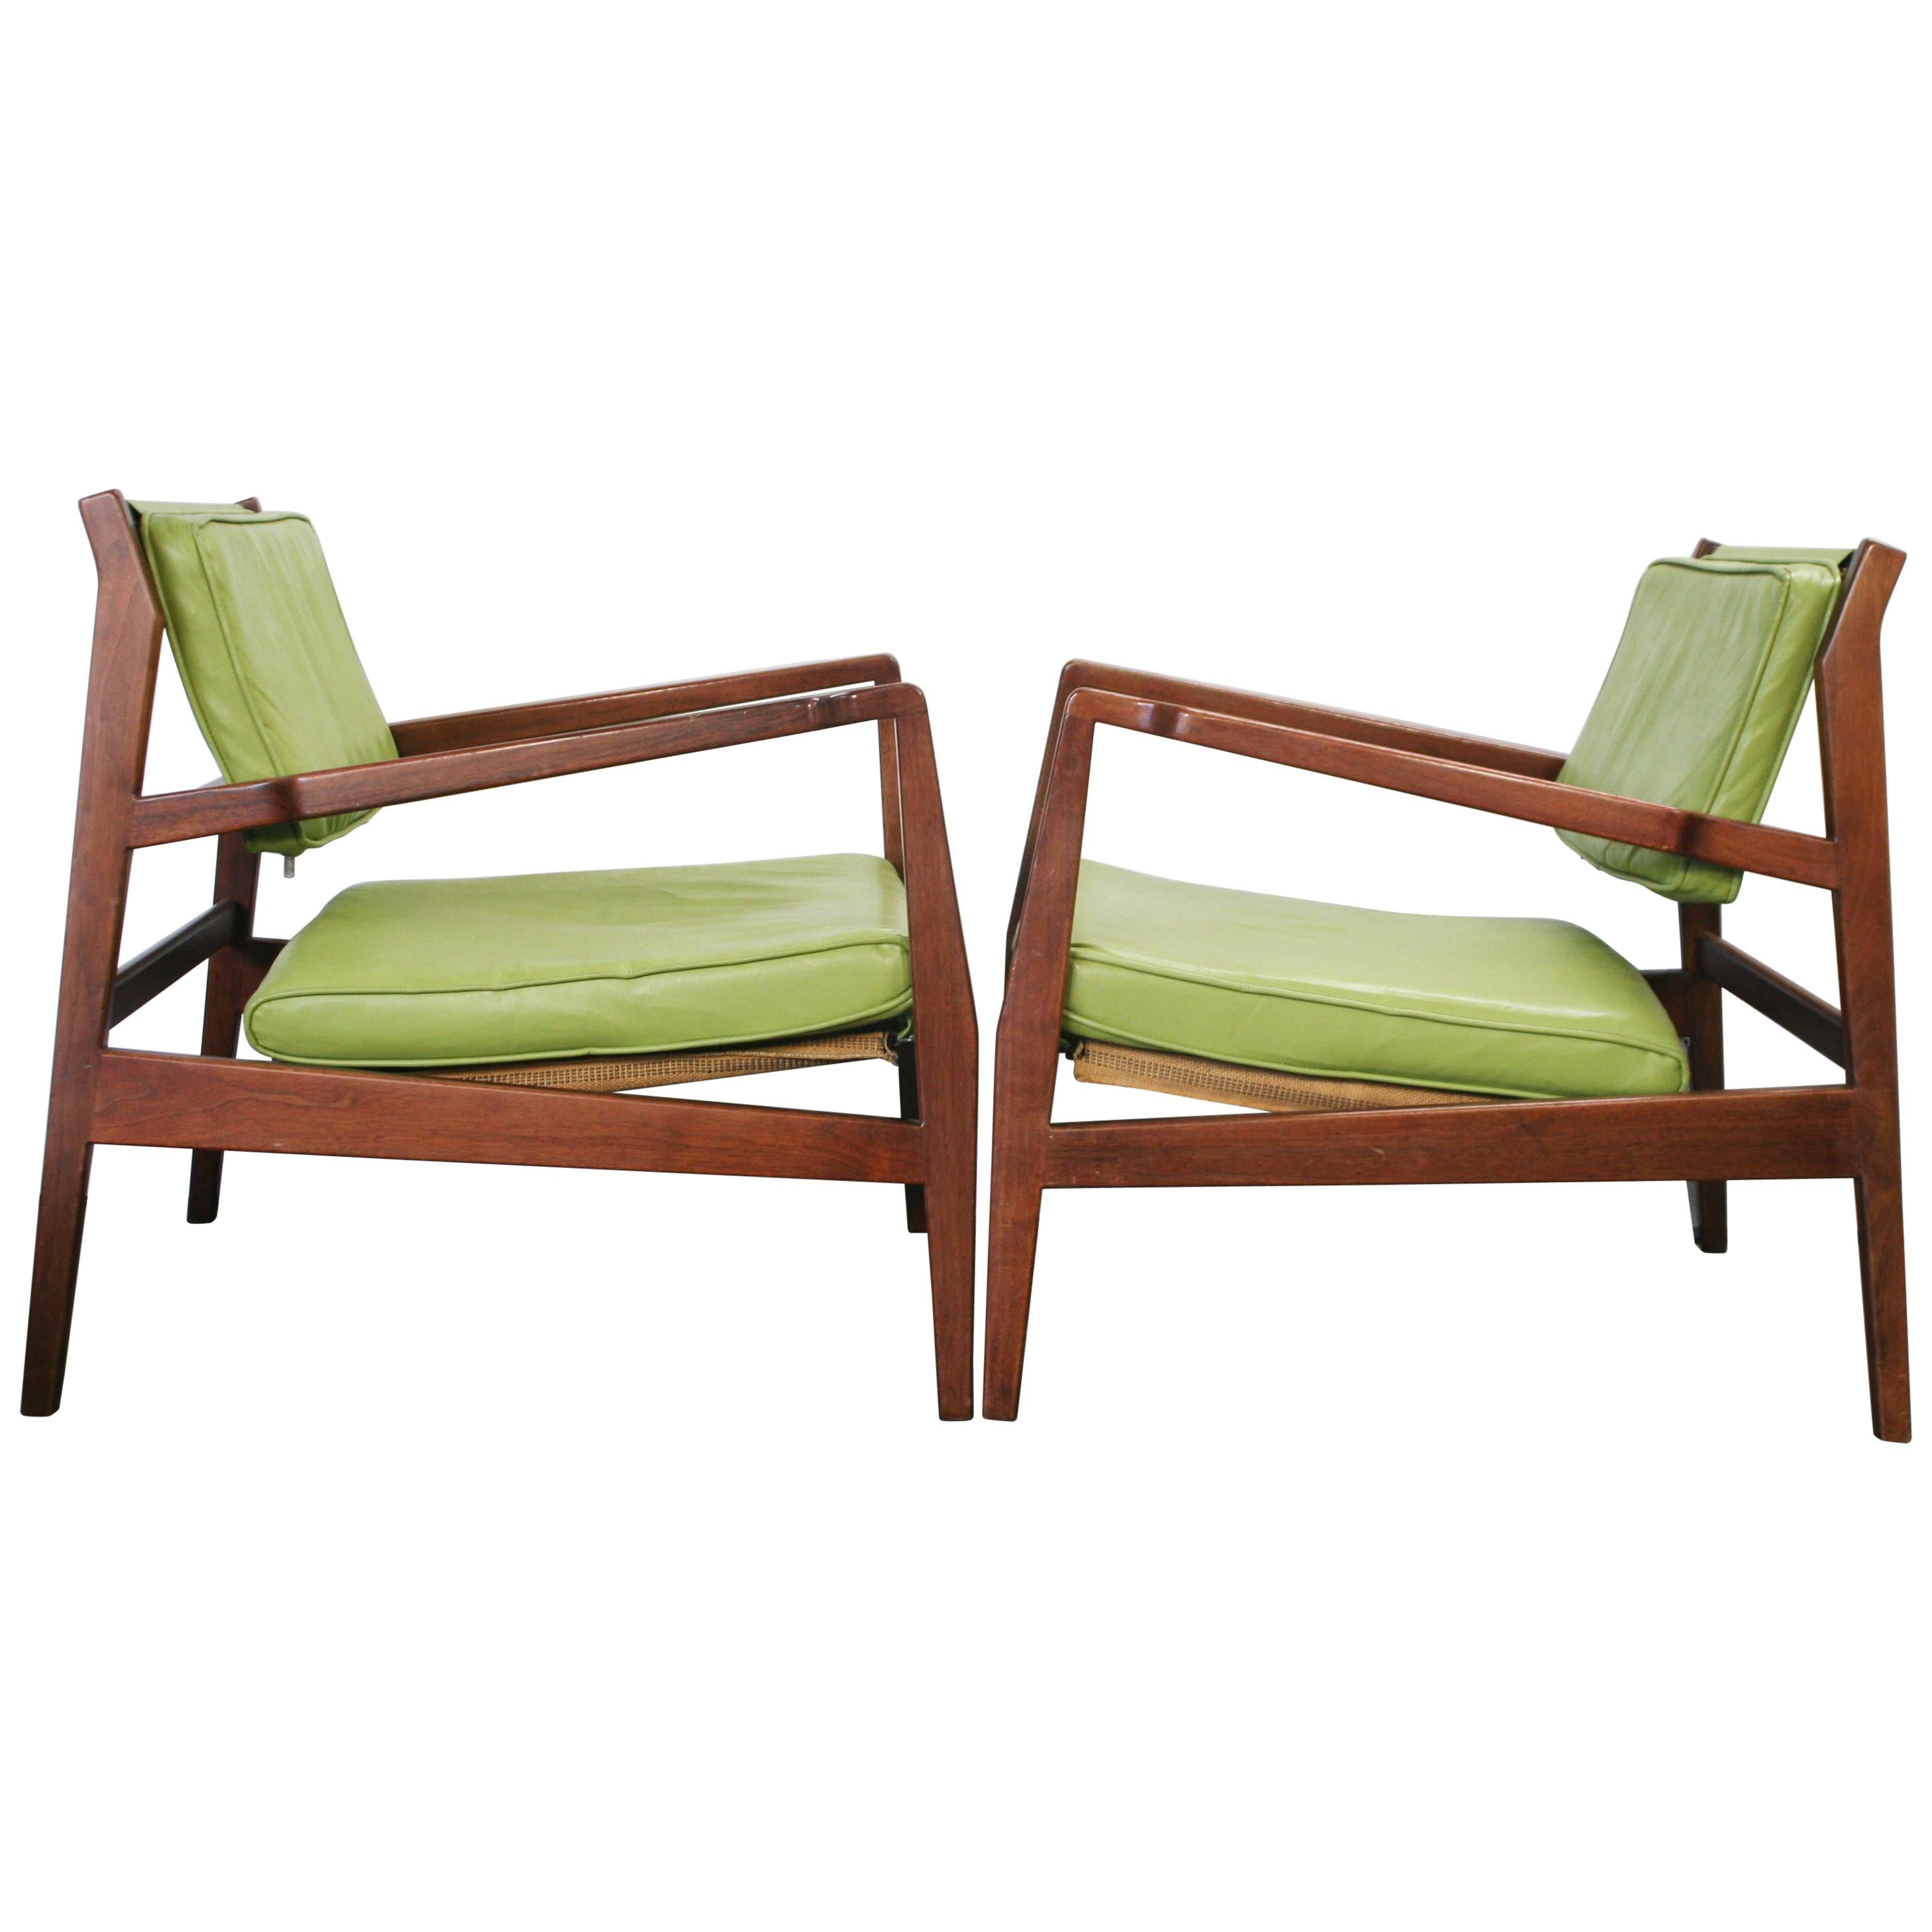 Pair of Rare Midcentury Jens Risom U 460 Low Lounge Chairs Green Leather